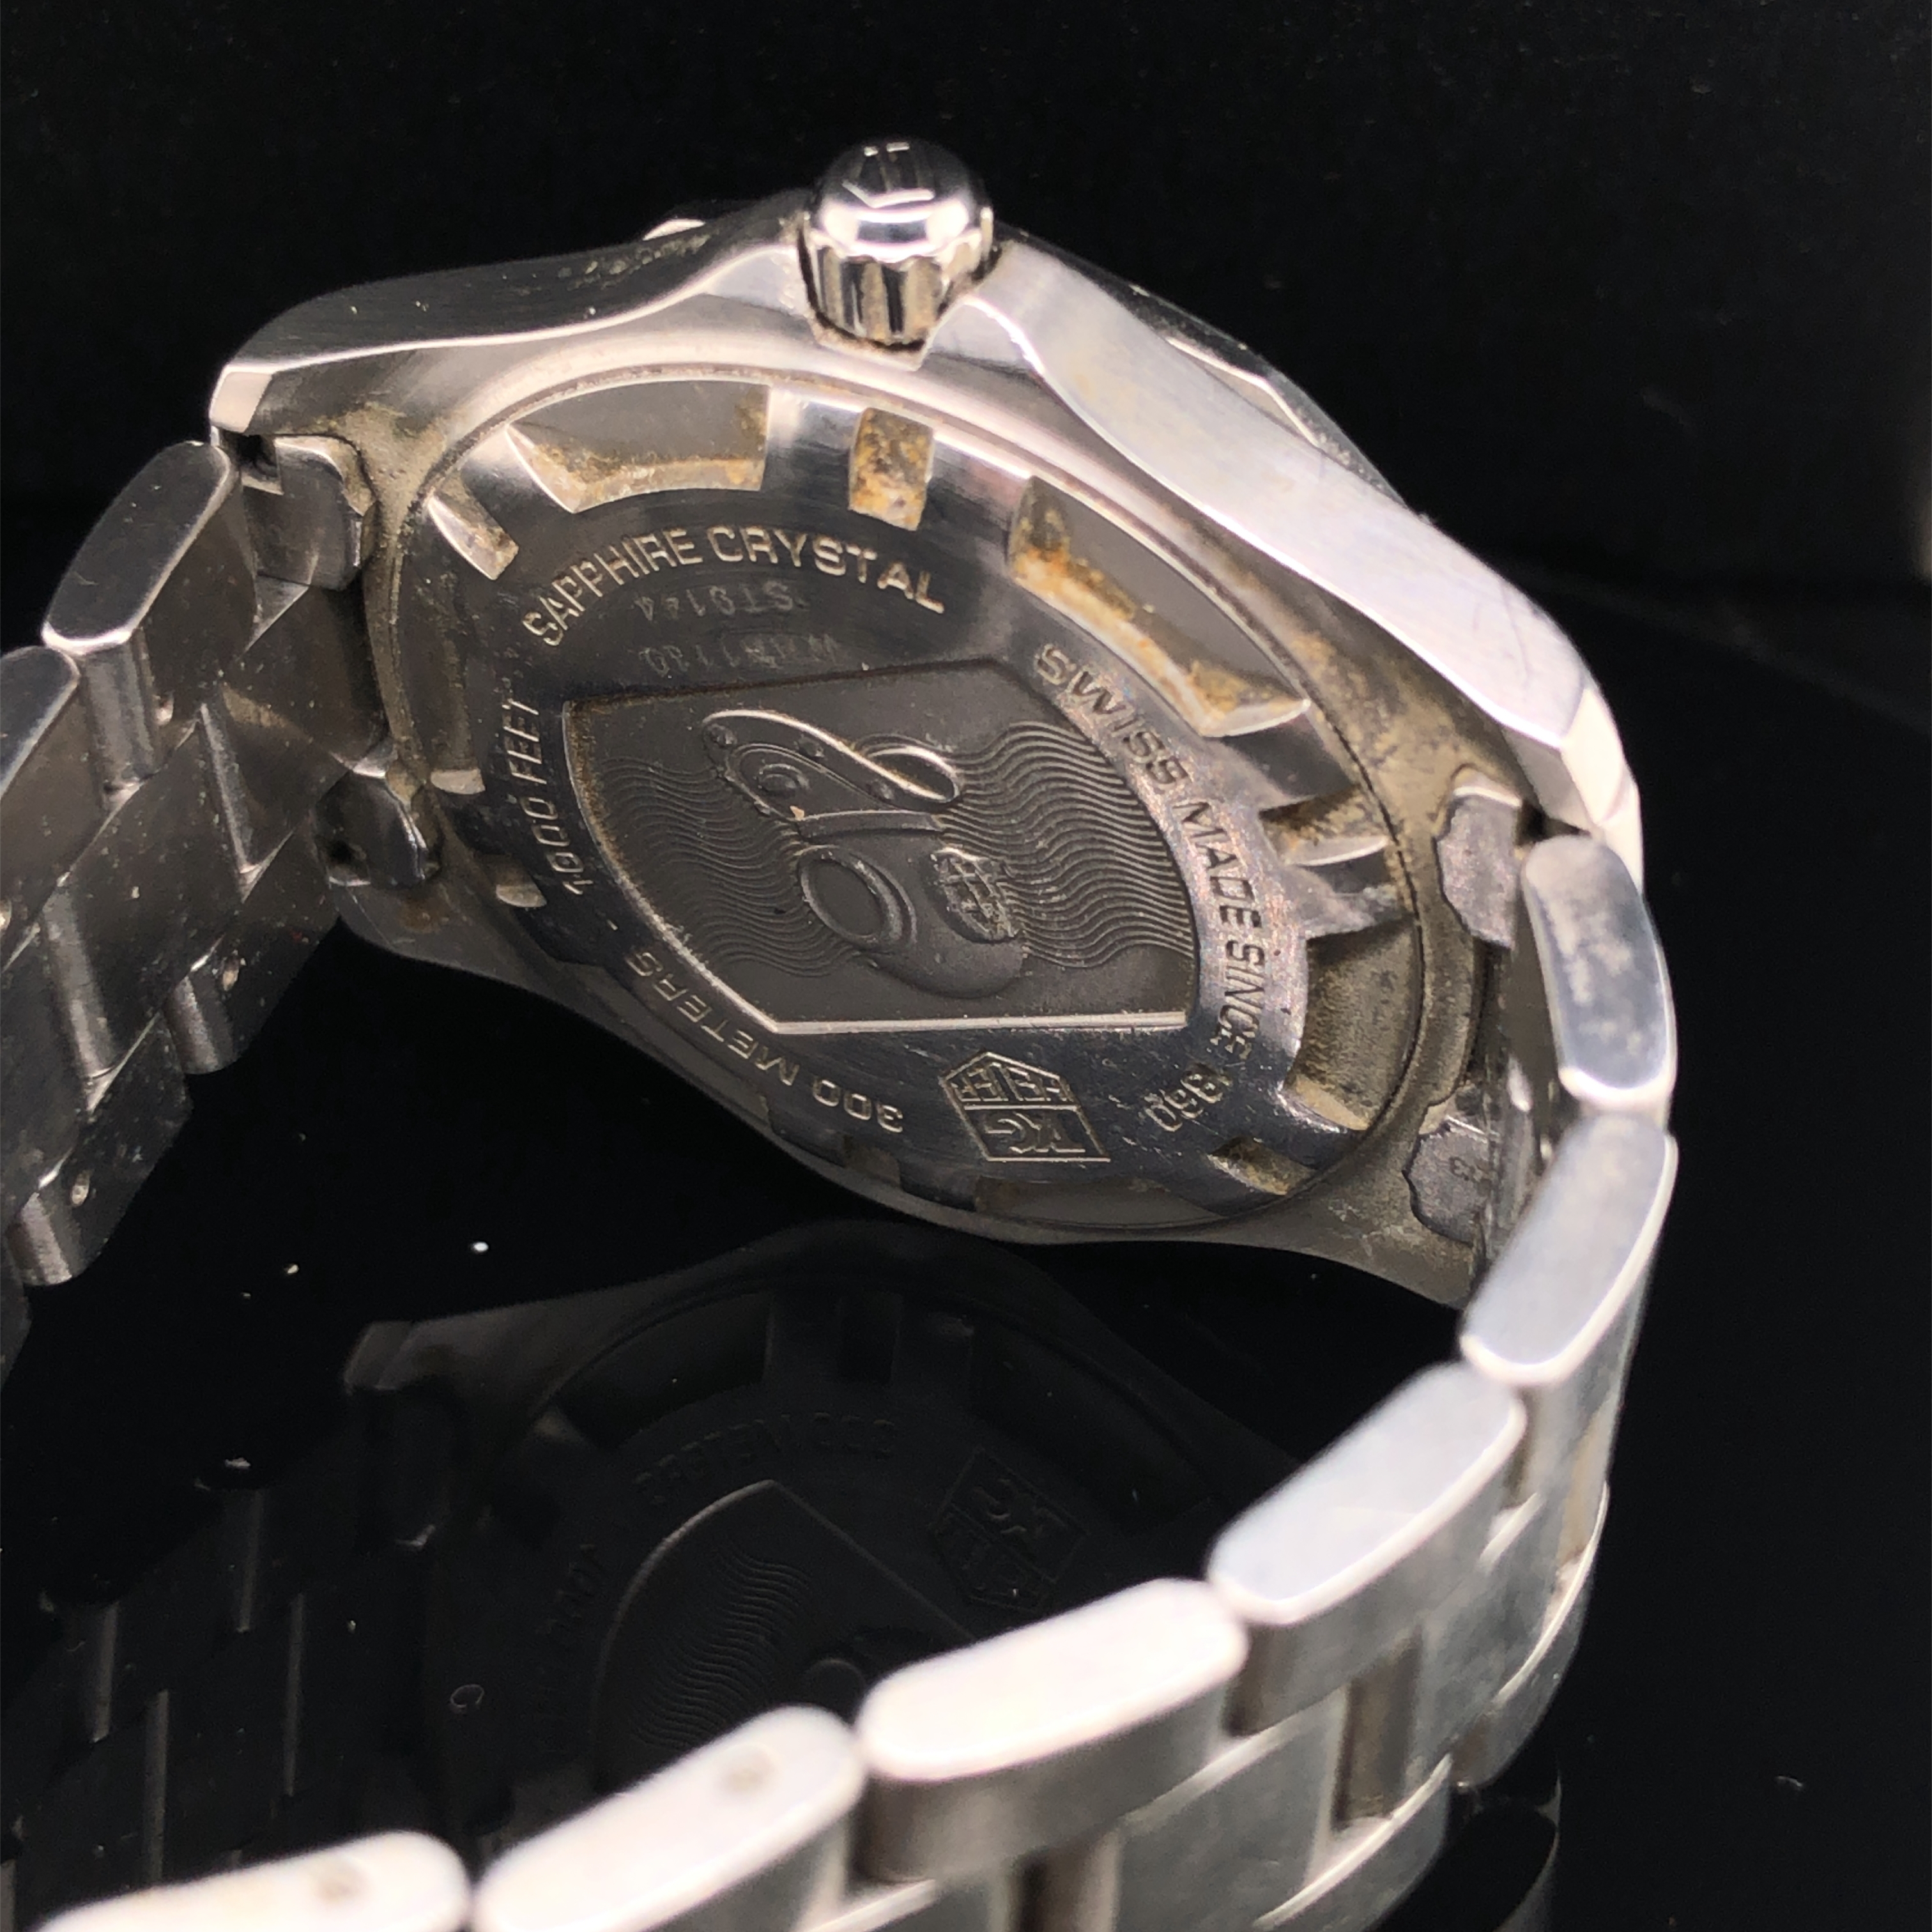 A TAG HEUER PROFESSIONAL QUARTZ STAINLESS STEEL GENTS WATCH, REF WAB1110. - Image 2 of 4